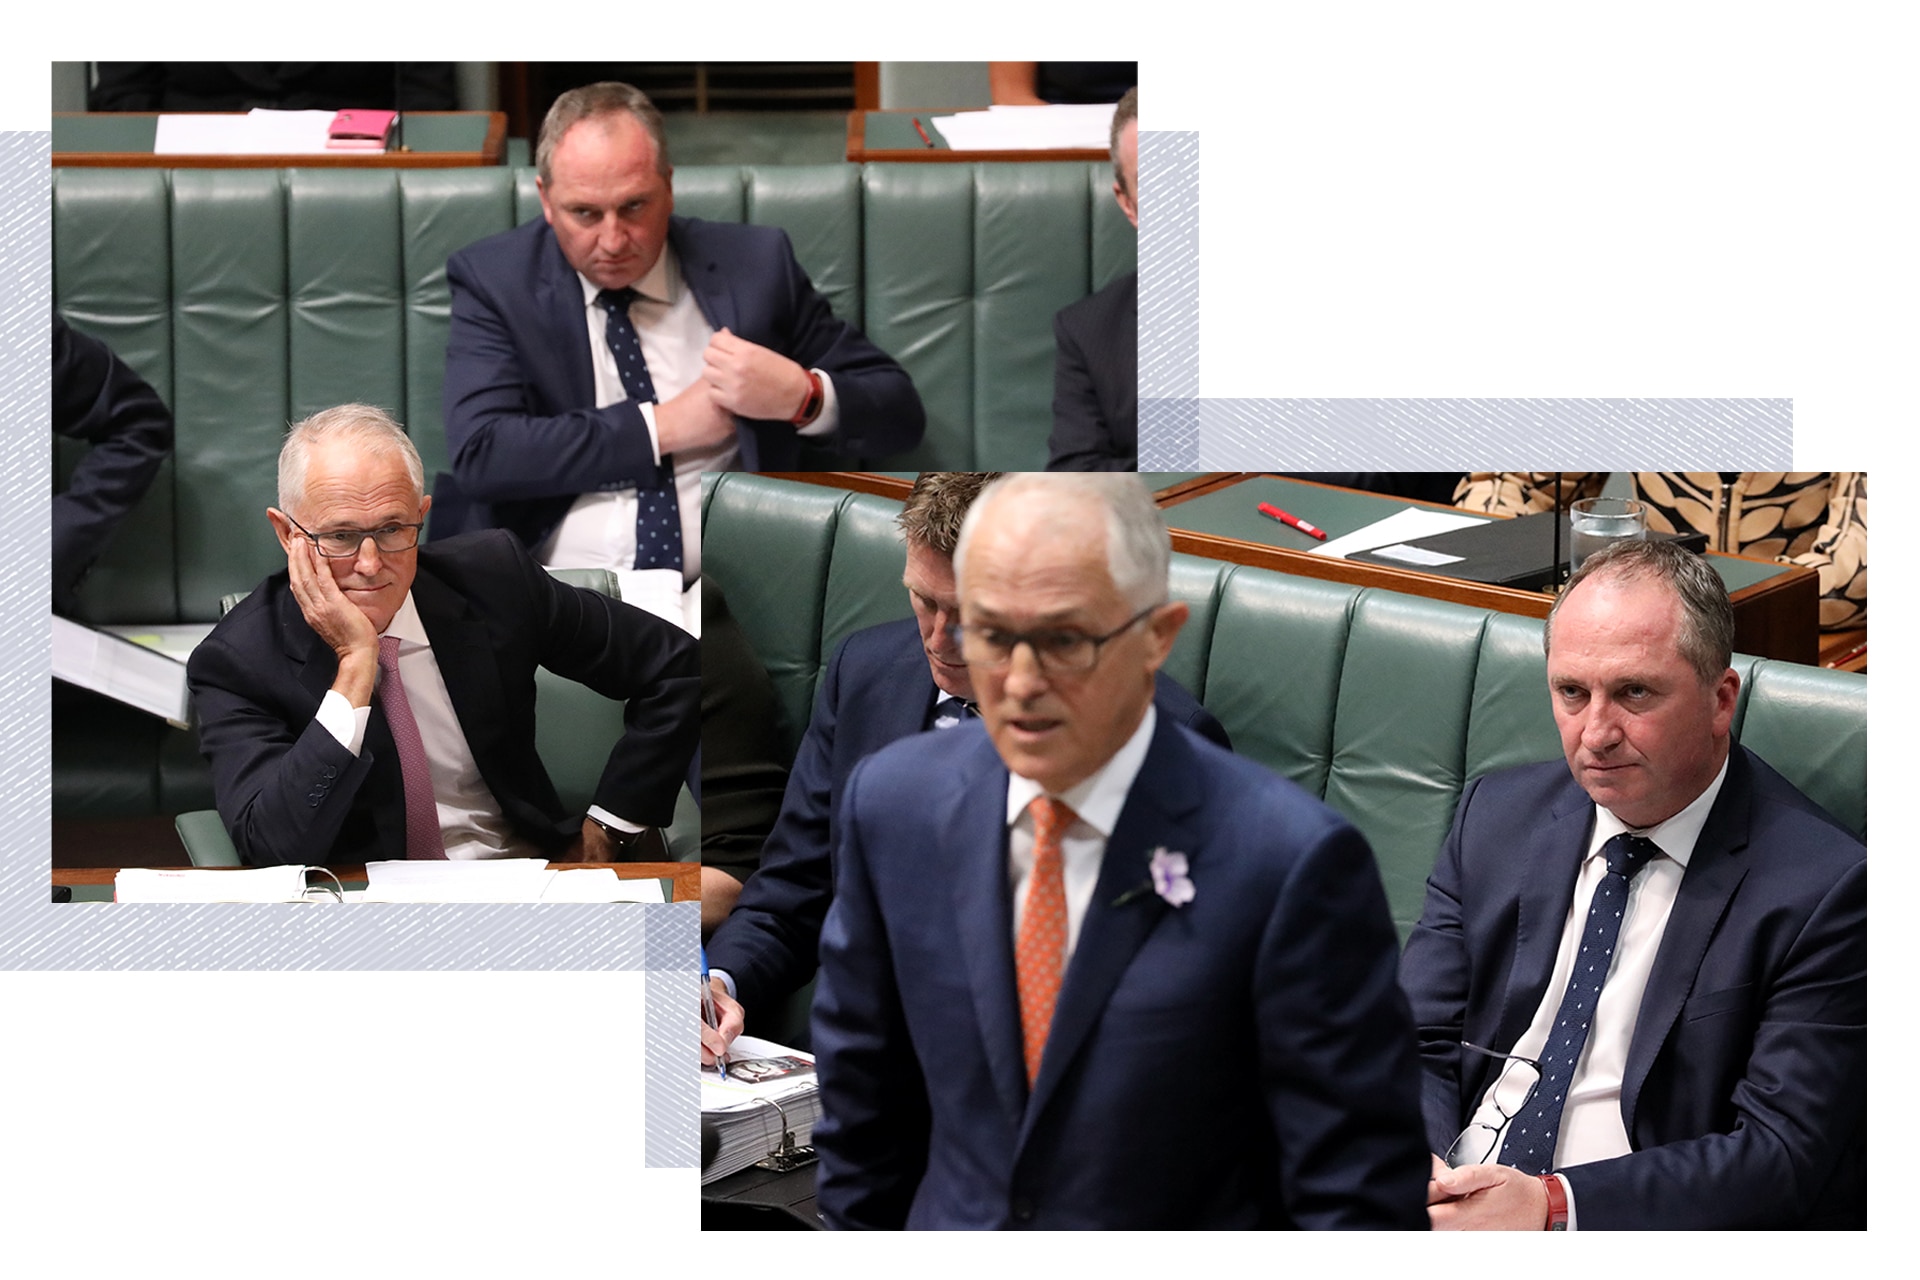 A composite of two images showing Barnaby Joyce sitting behind Malcolm Turnbull in parliament, glaring at him.